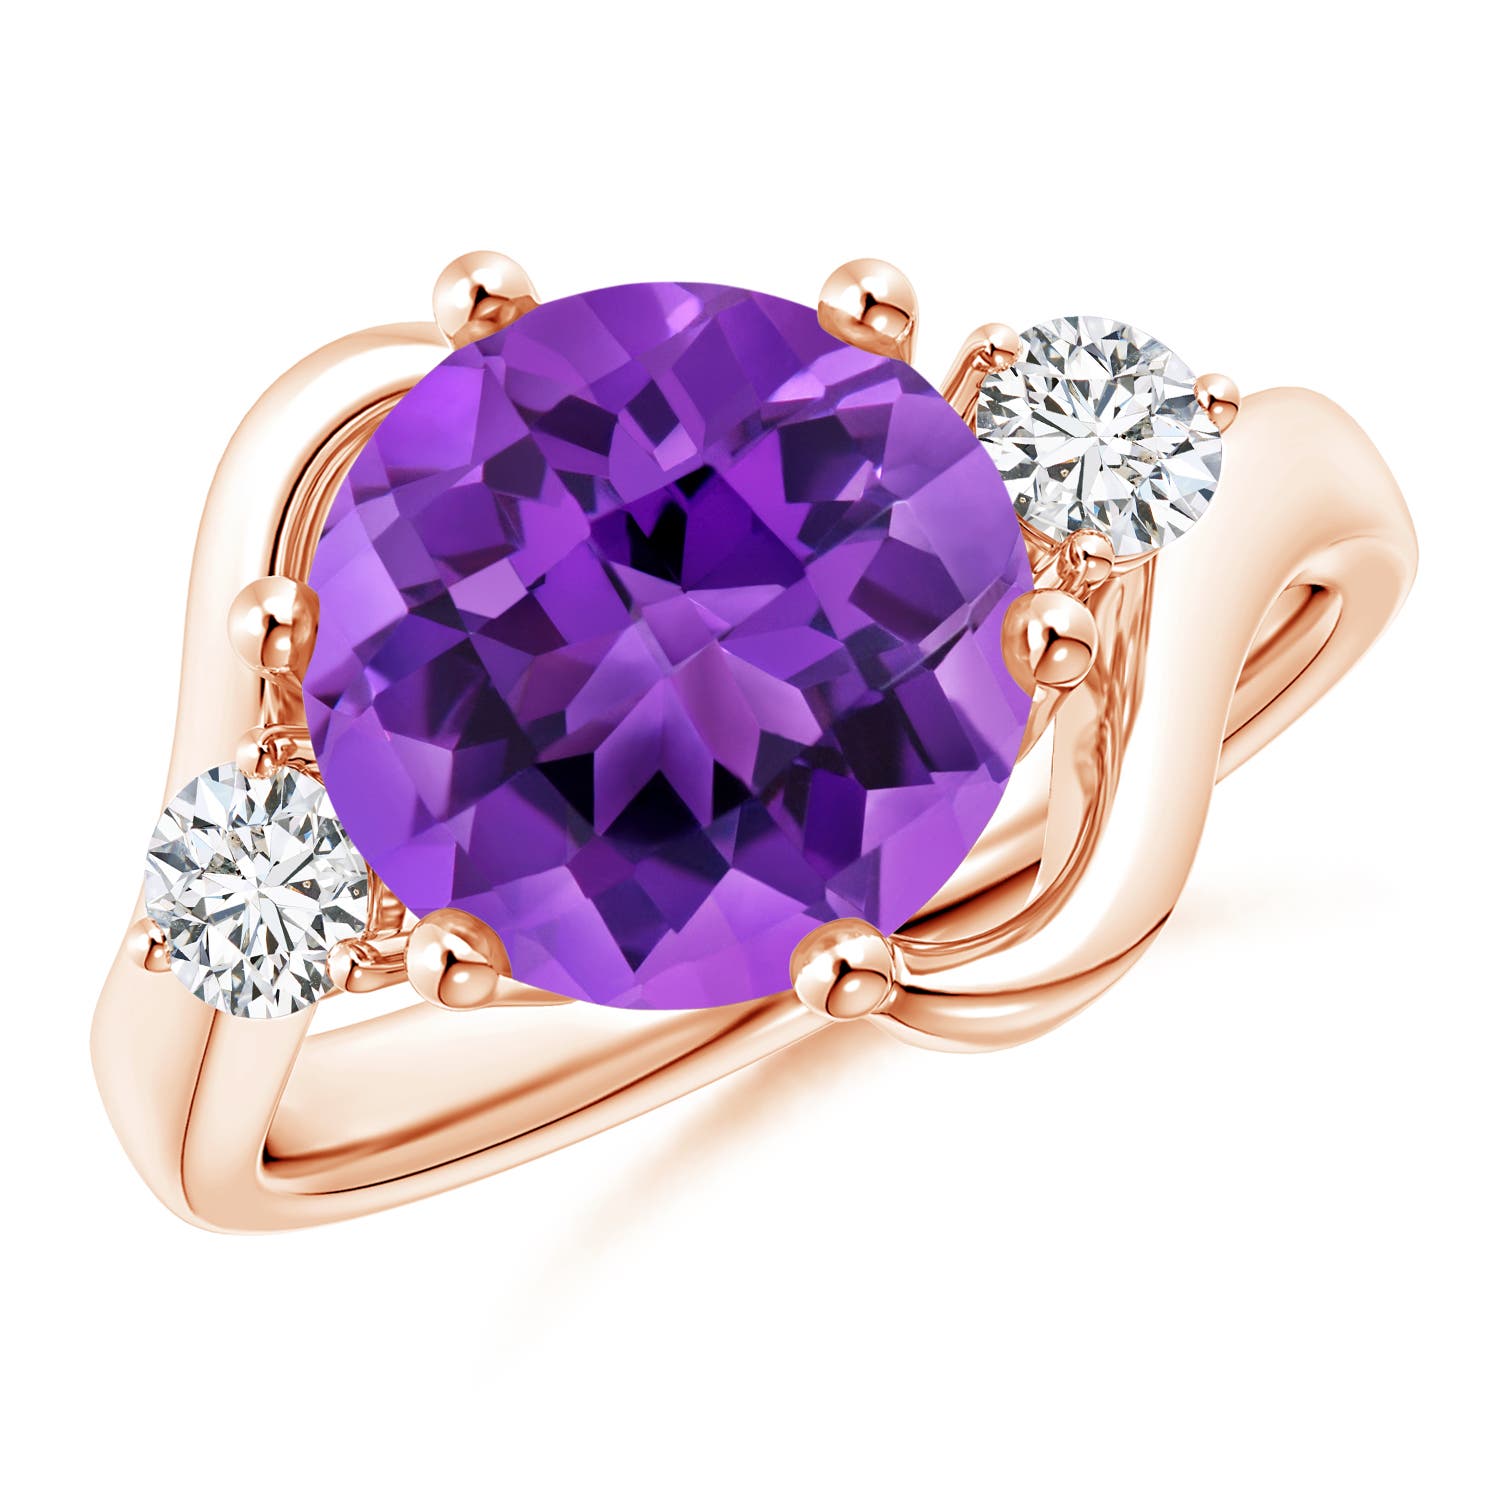 AAA - Amethyst / 4.04 CT / 14 KT Rose Gold